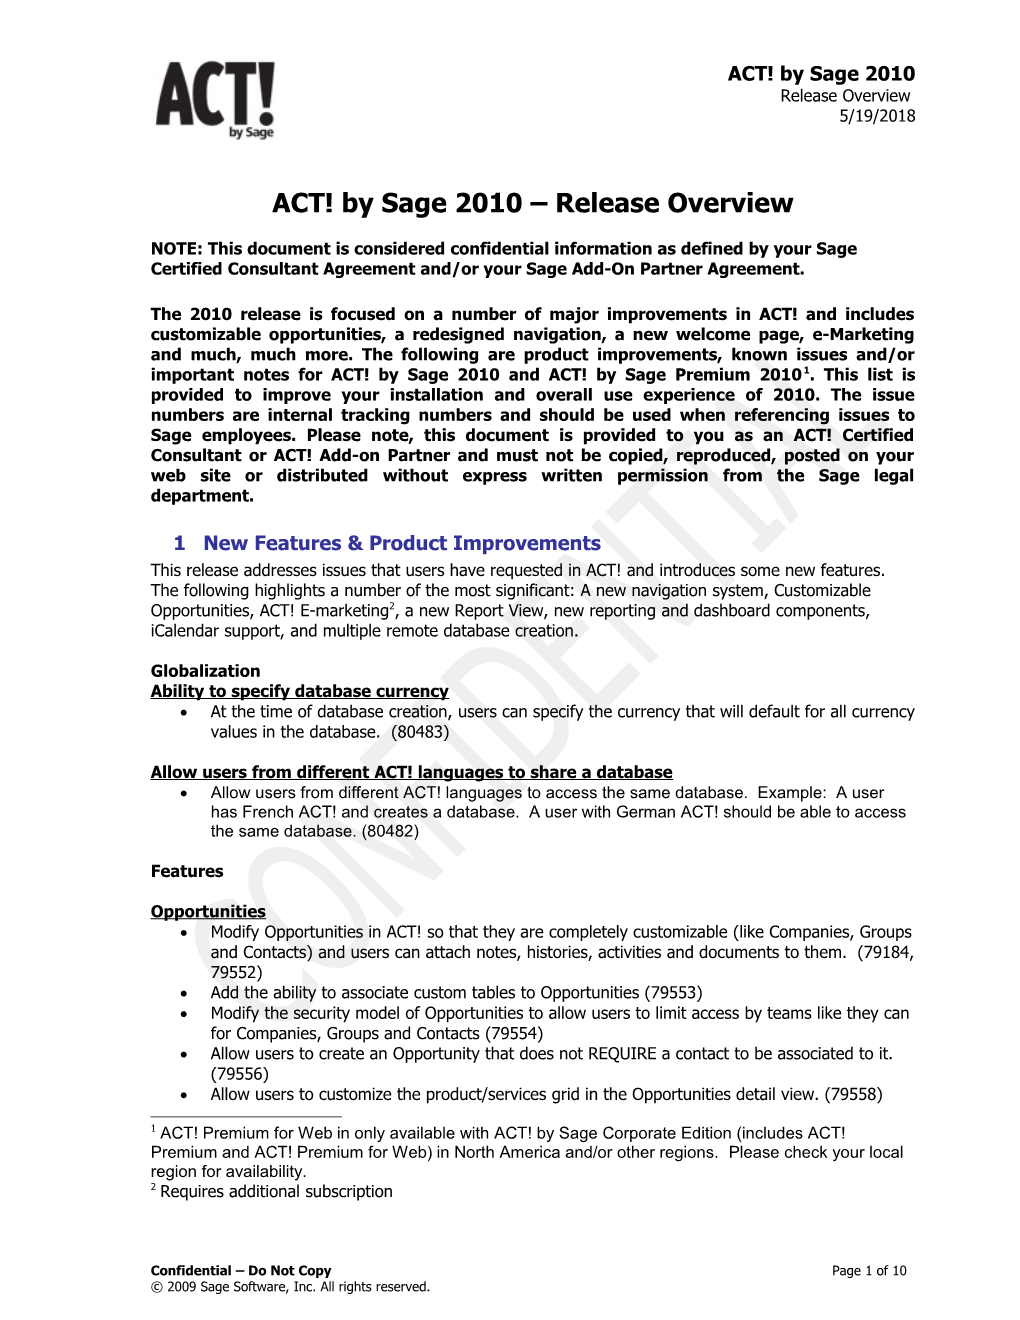 ACT! by Sage 2007 (9.0.1) Release Notes